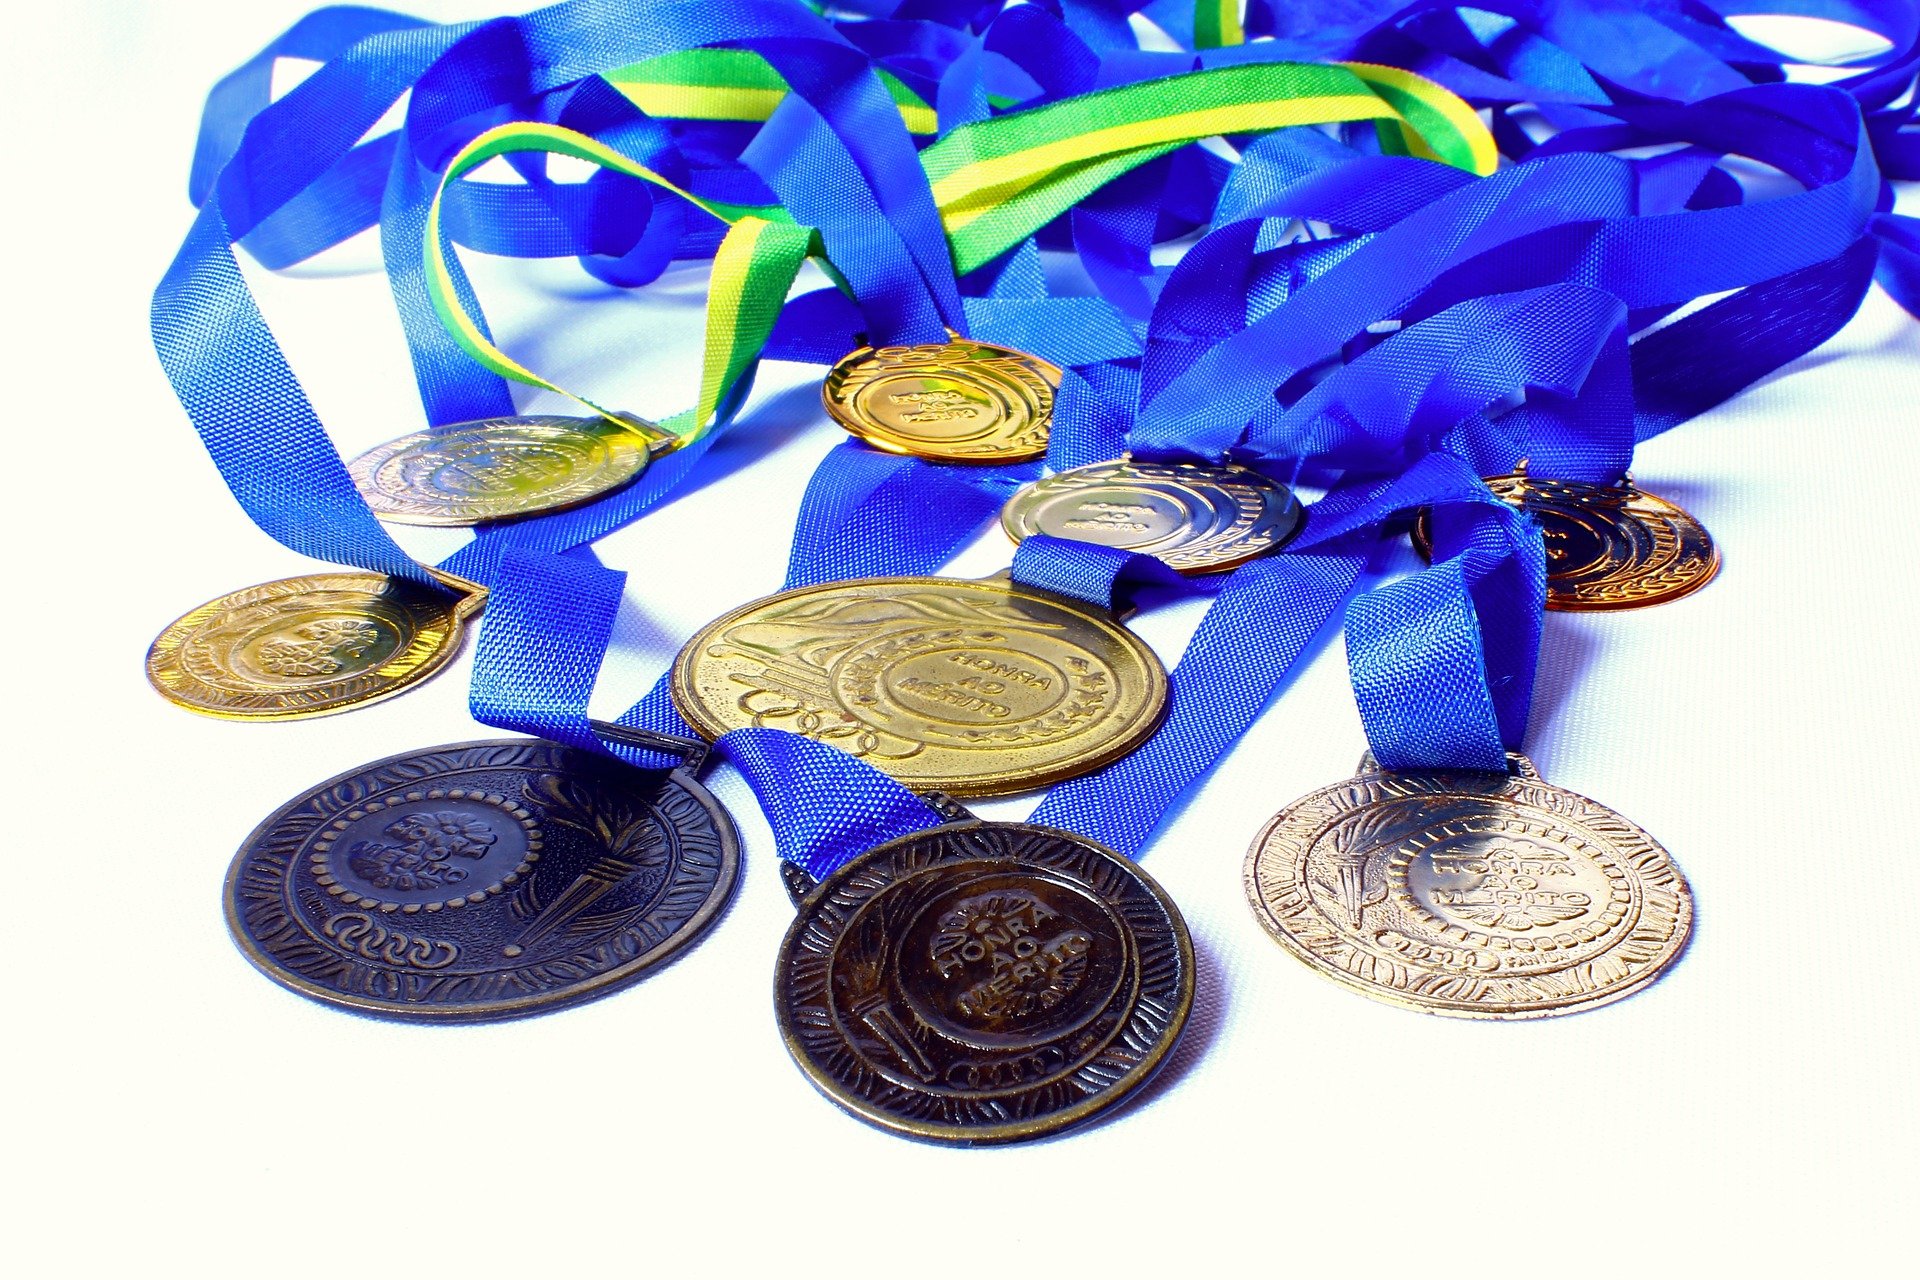 Medaille